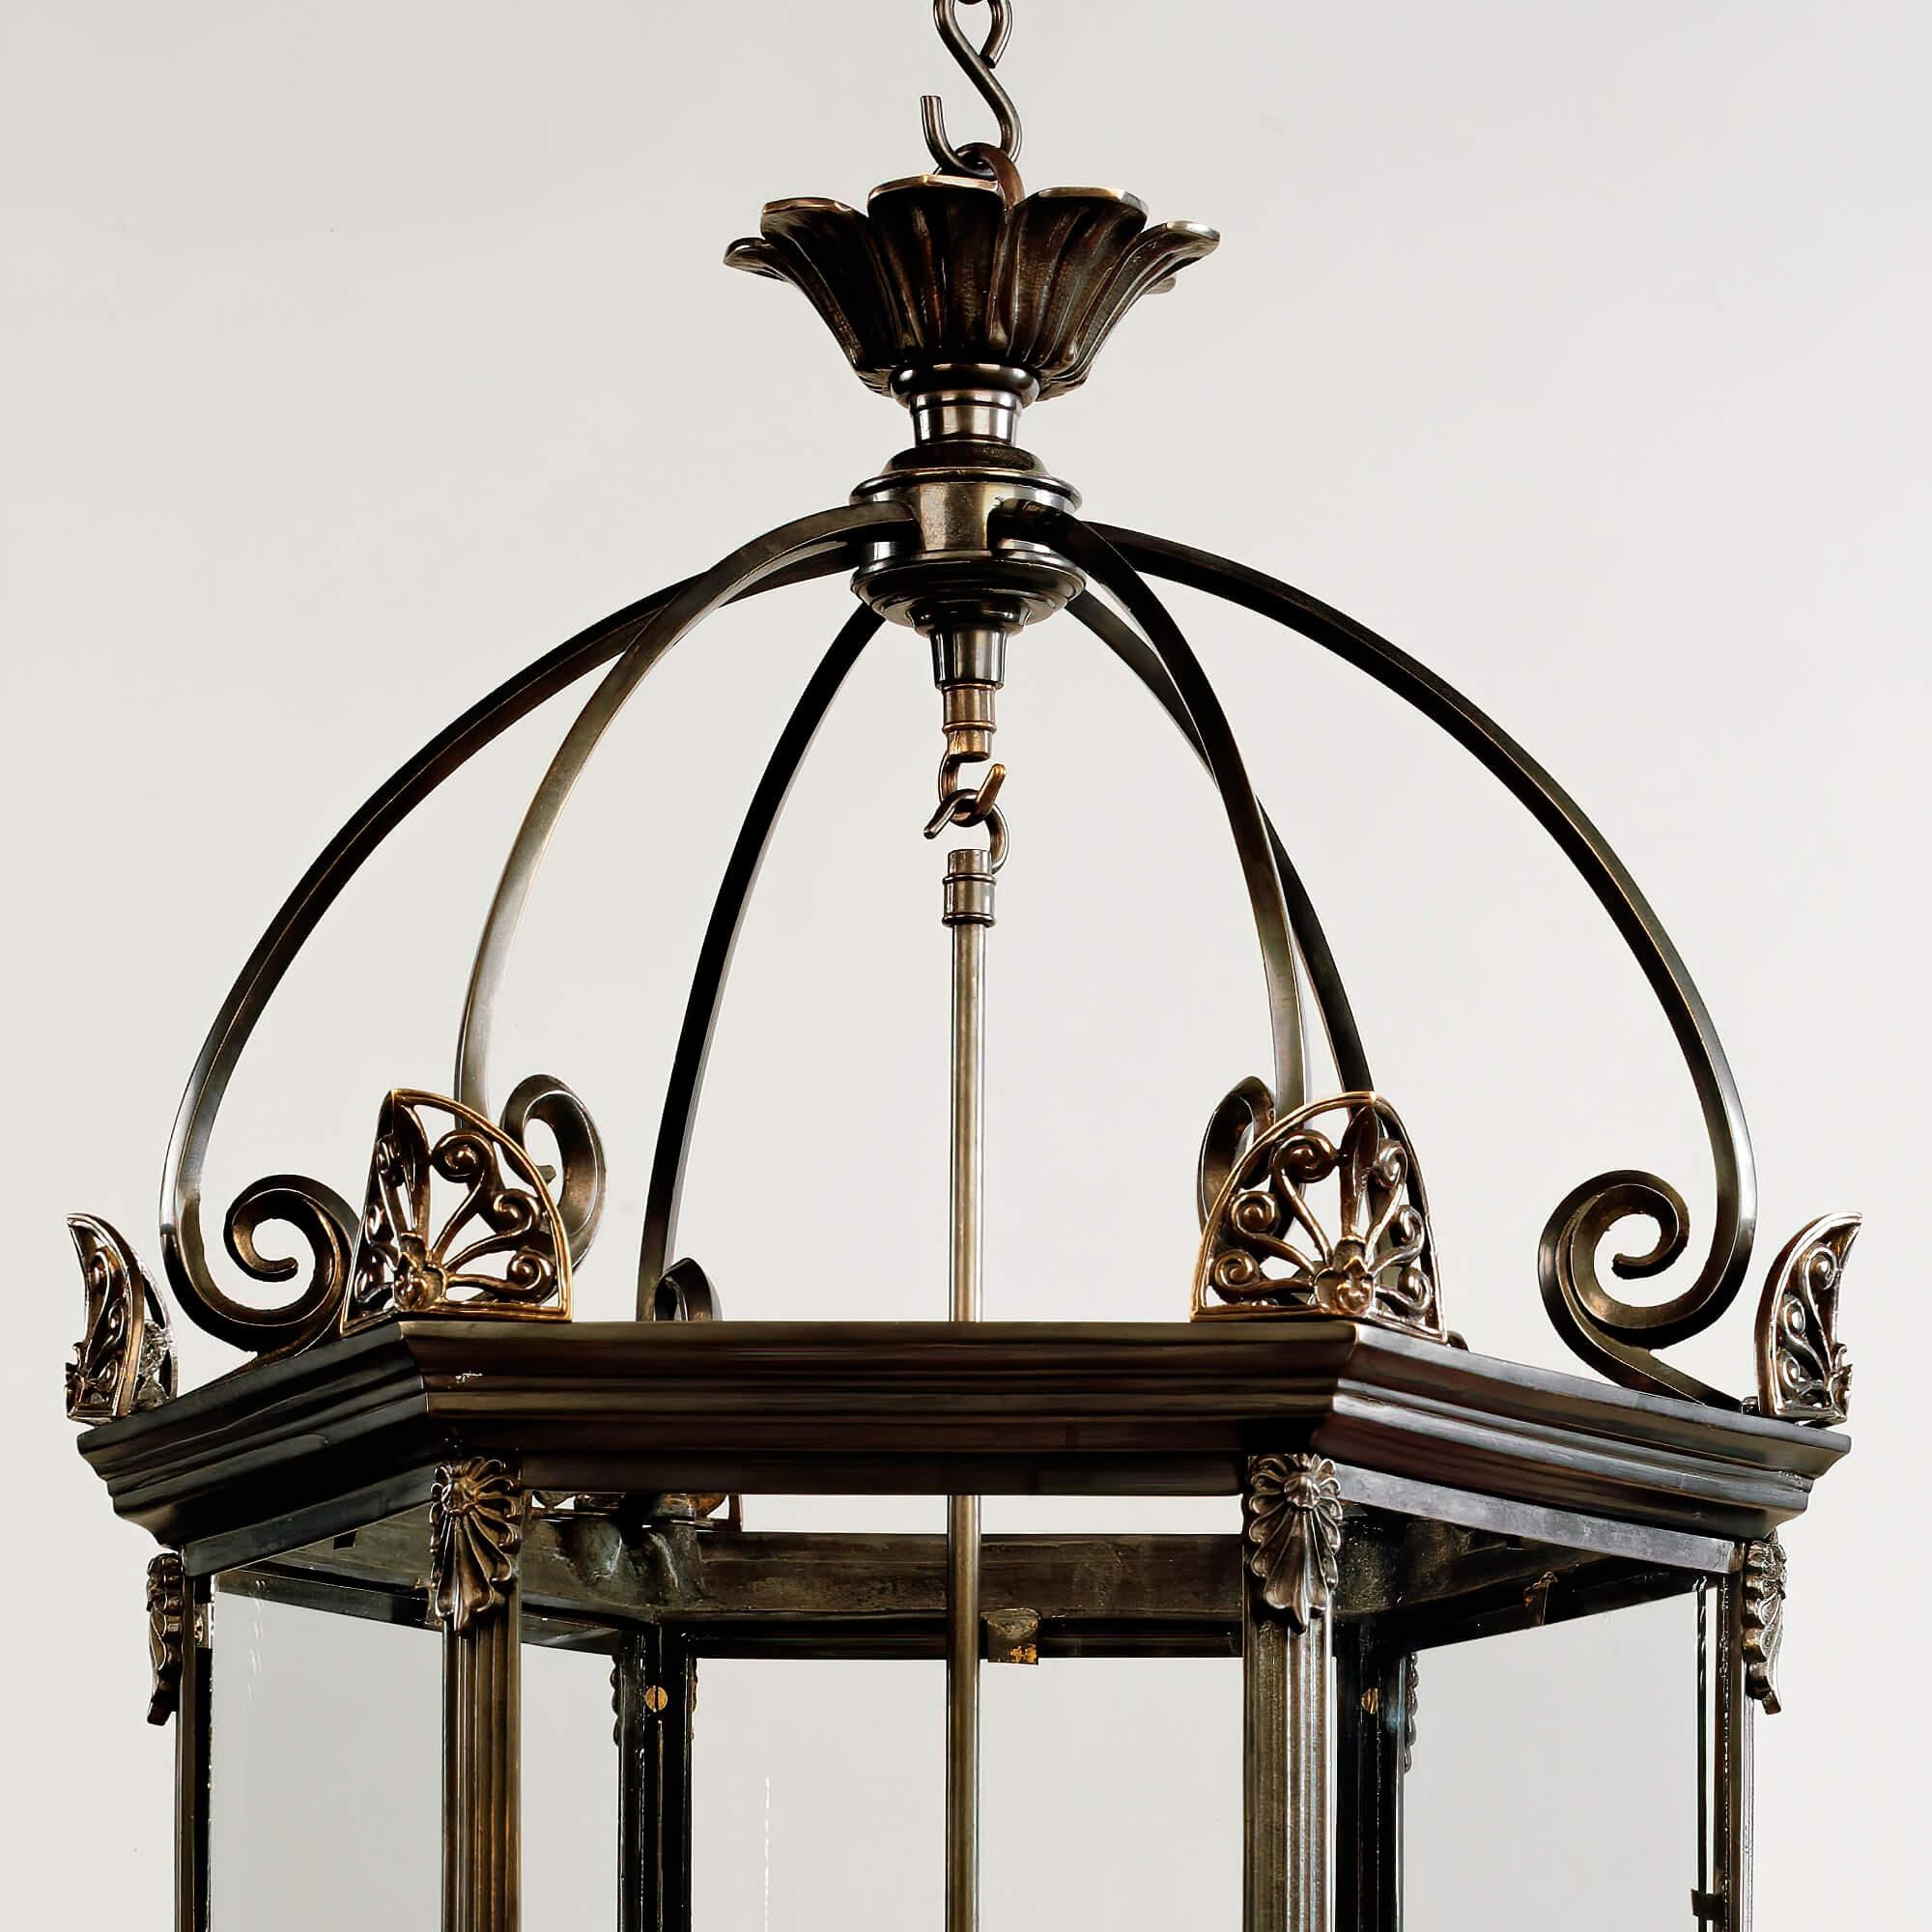 A fine large scale English antique style hall lantern with brass scrolling crown, with anthemion form mounts to the hexagonal frame, with a stepped molded edge, with a stop fluted frame and door and having additional ornamental anthemion mounts and